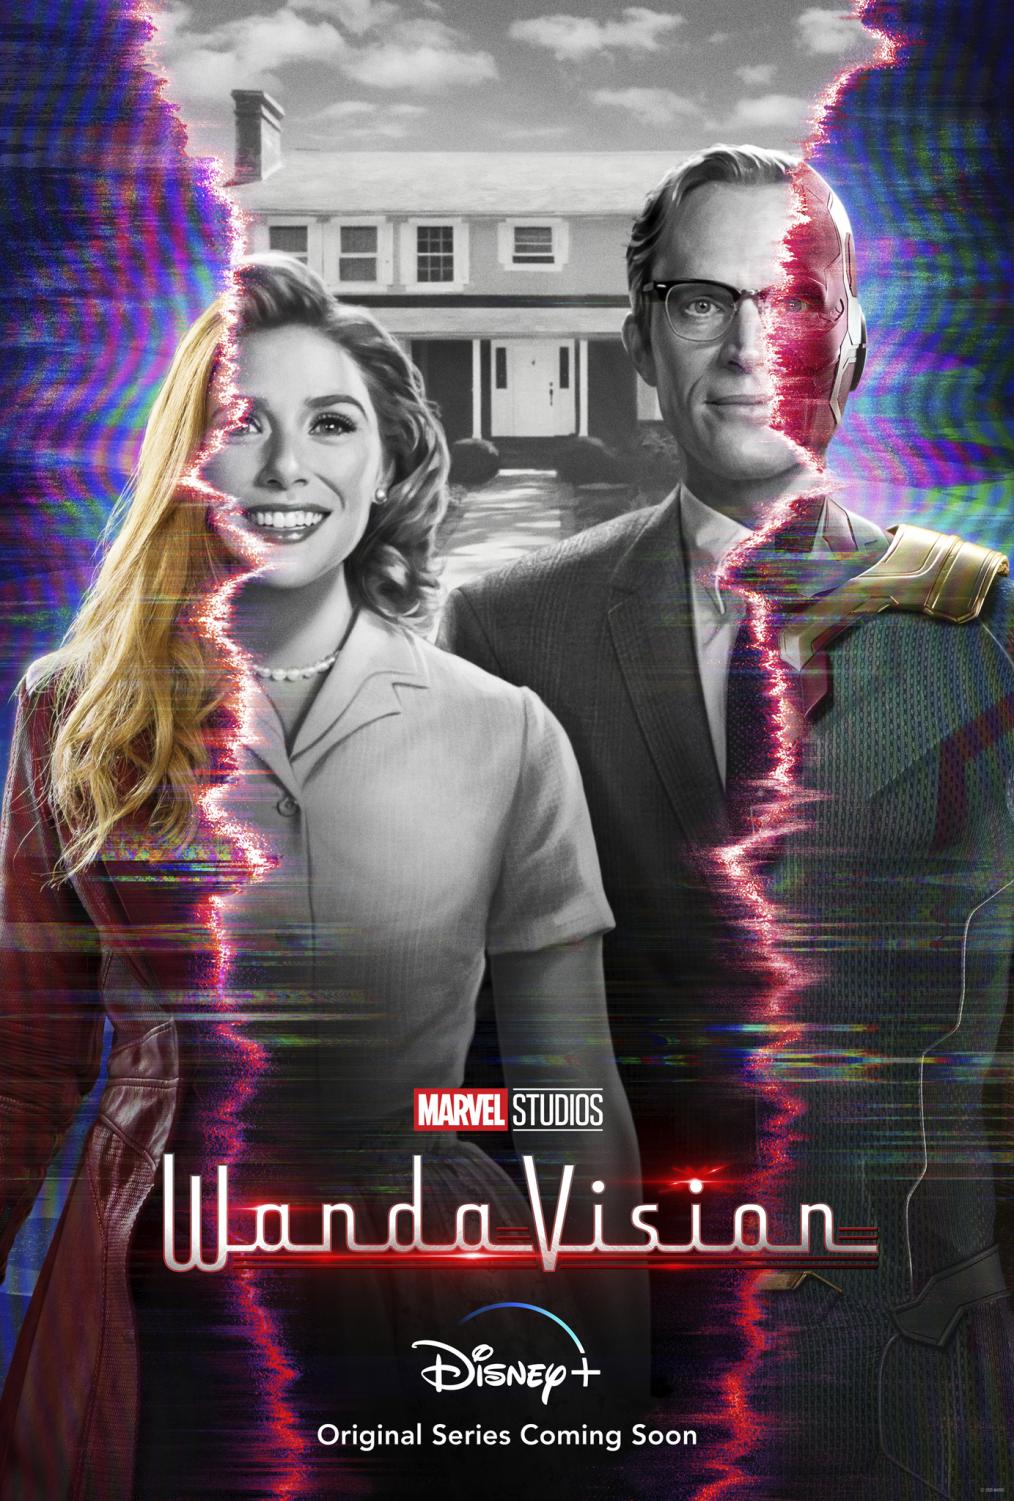 WandaVision released on January 15, 2021 on Disney+. This is the first production in Phase Four.